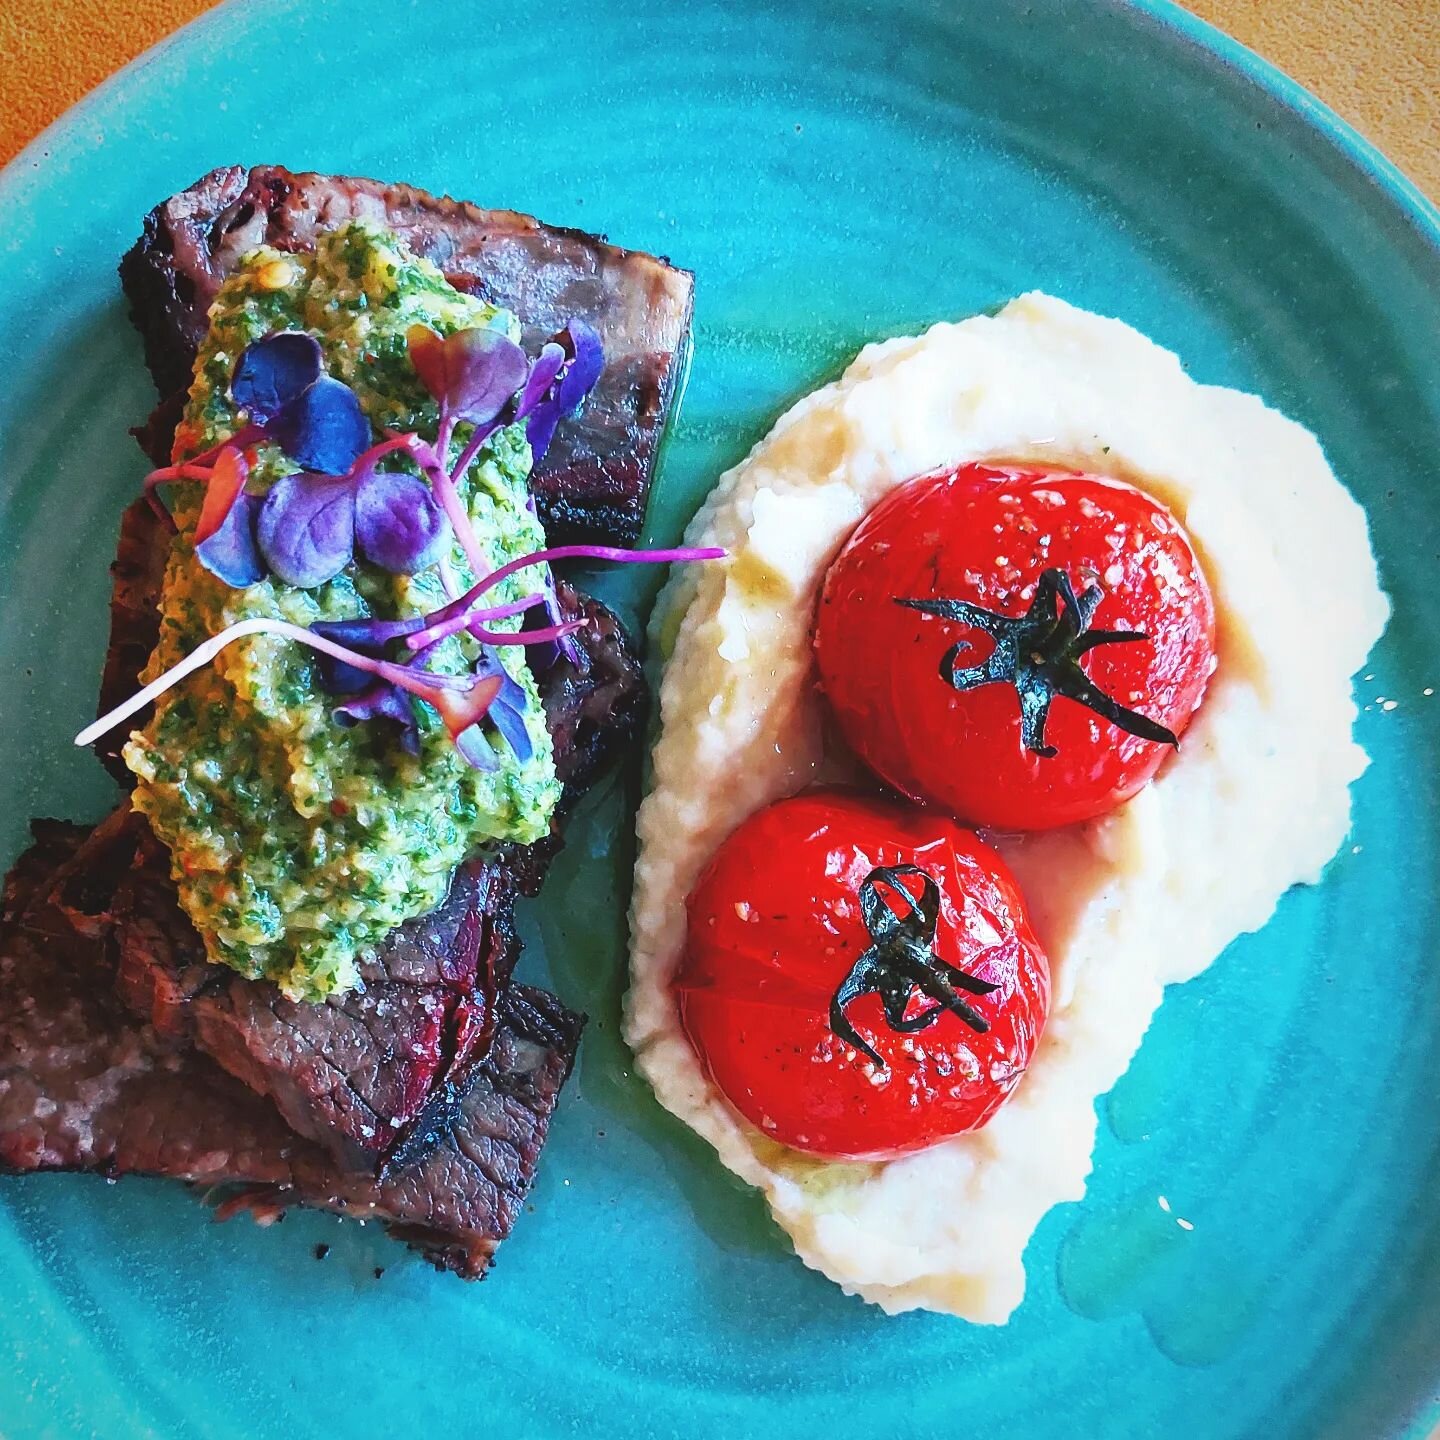 We've got a new, very moreish, brisket dish on our February menu 🤩 

@saltandwoodbbq beef brisket with garlicy cauliflower mash, slow roasted vine tomatoes, chimichurri, and coriander oil.

Come and check it out, along with a few other new goodies s